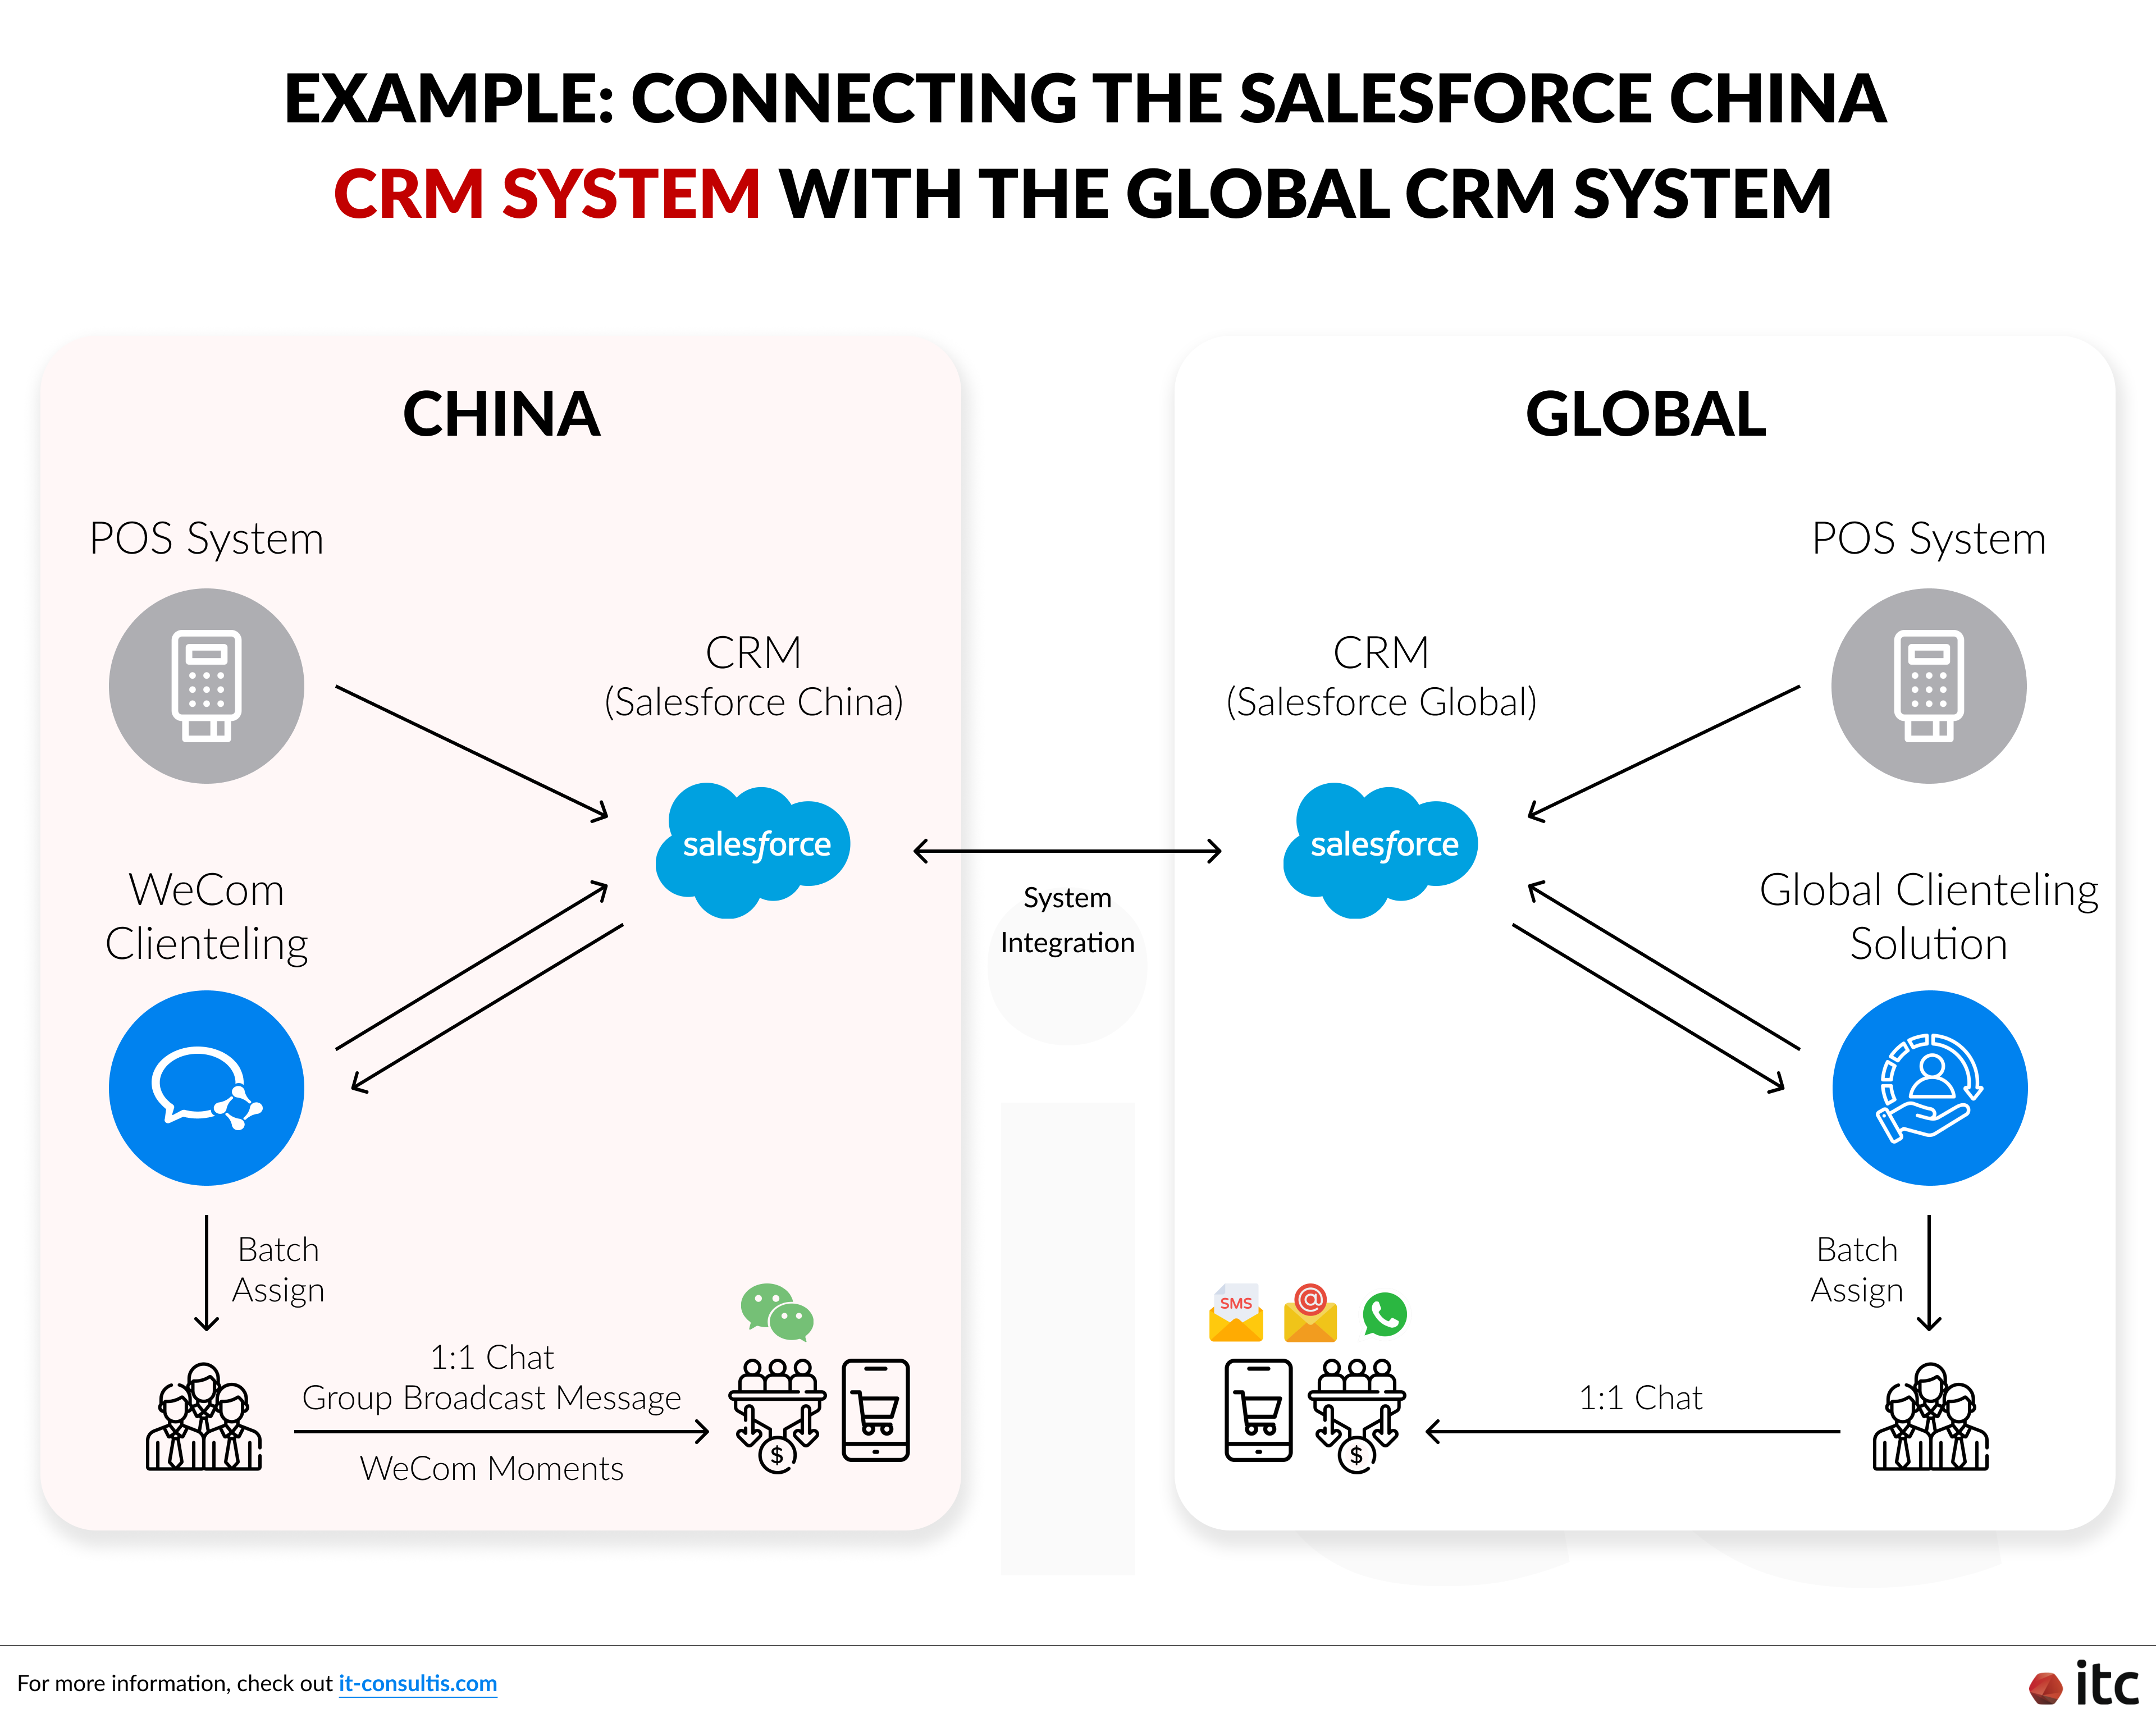 Example of connecting Salesforce China CRM system with the Global CRM system